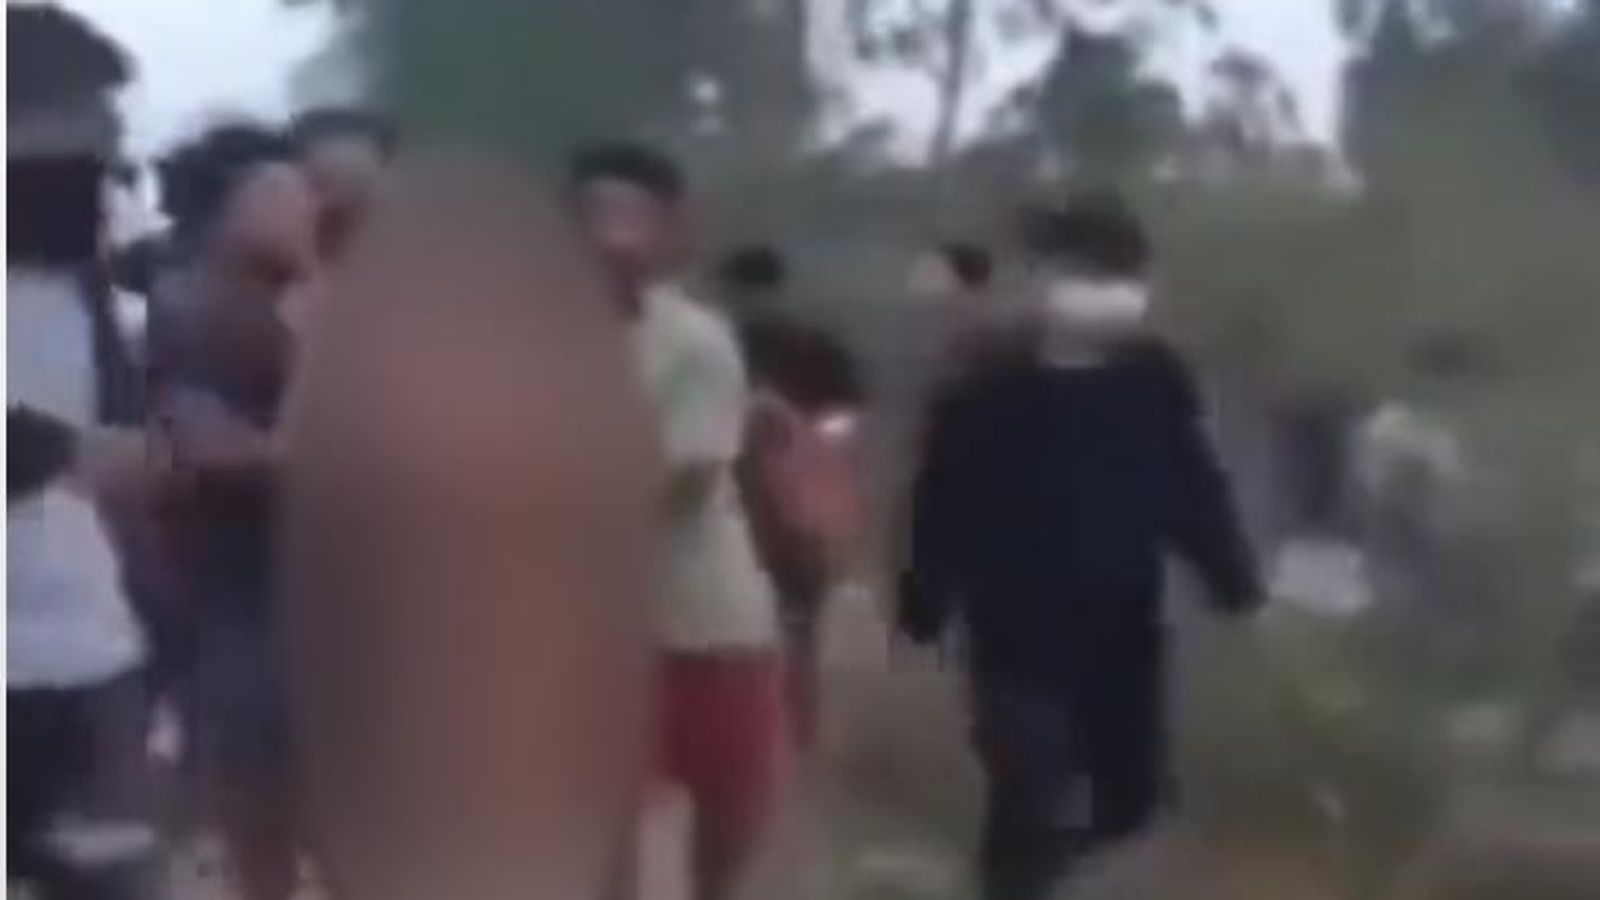 Desi Indian Rep Xxx Video - Gang rape investigated as video shows abducted Indian women being paraded  naked in Manipur | World News | Sky News